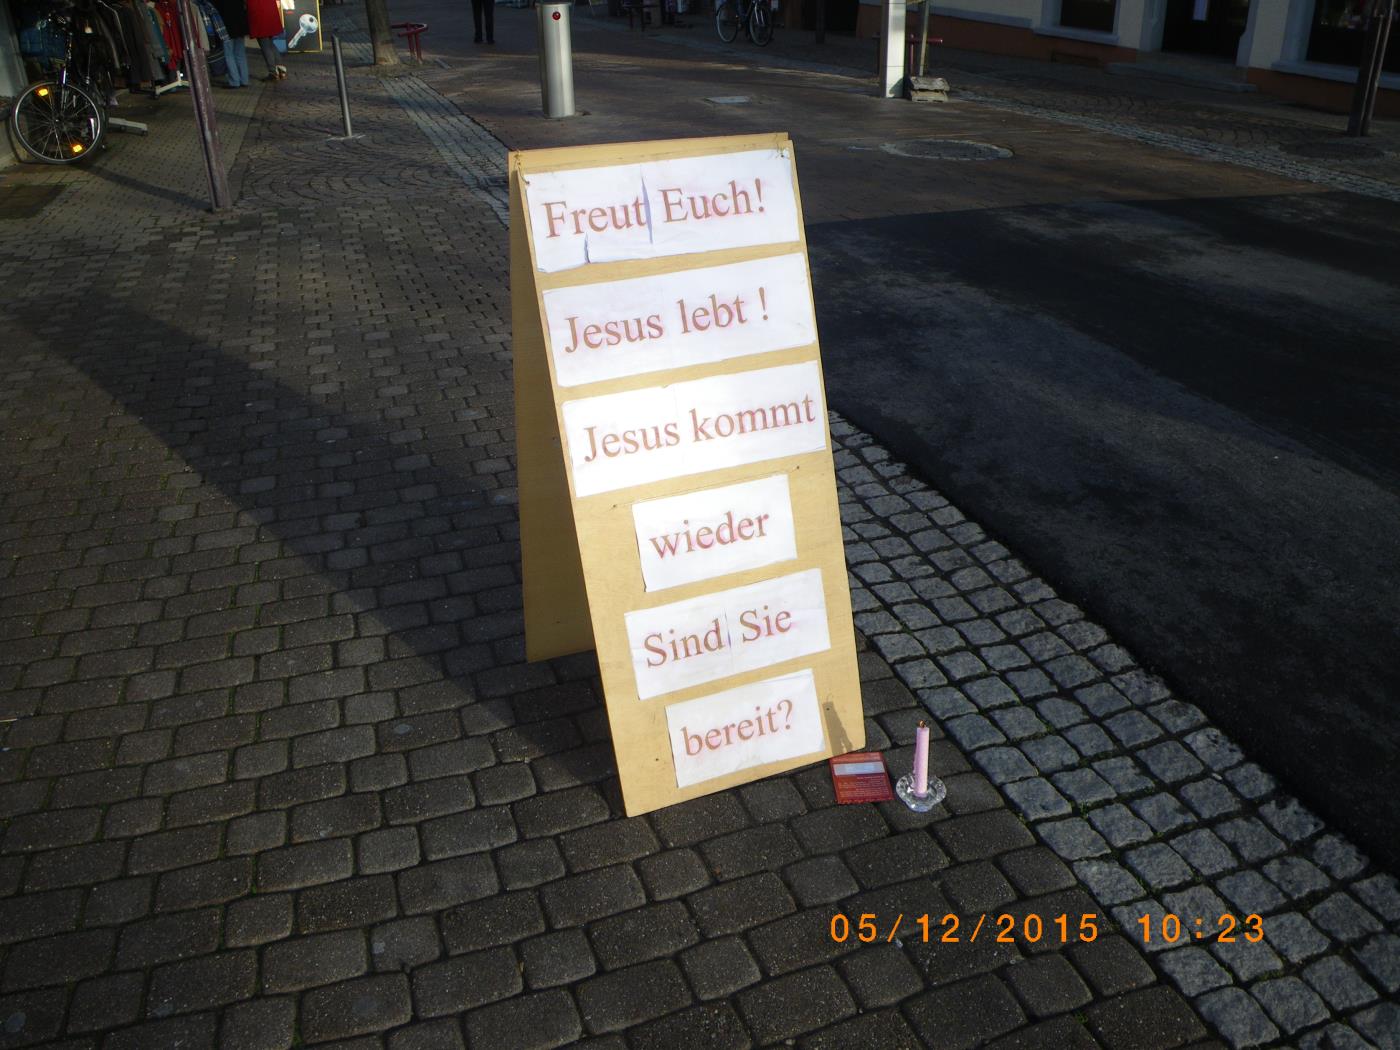 Wiesloch: No Jehovah's Witnesses – but Christians!